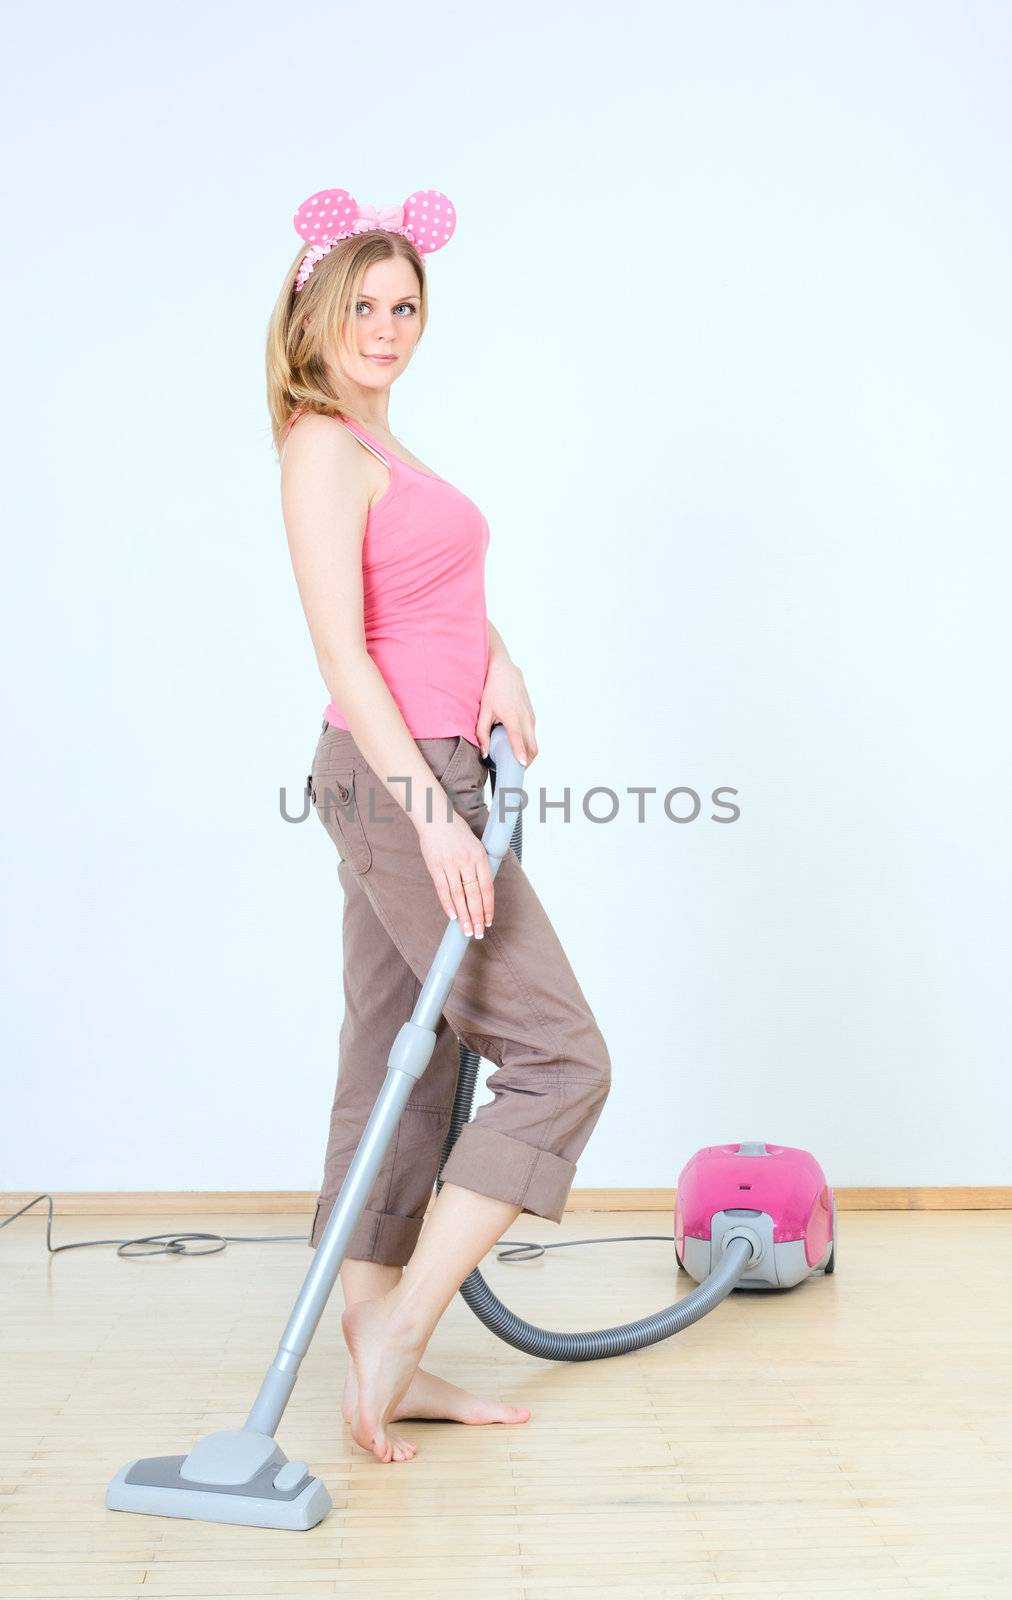 cute young woman with vacuum cleaner at homework